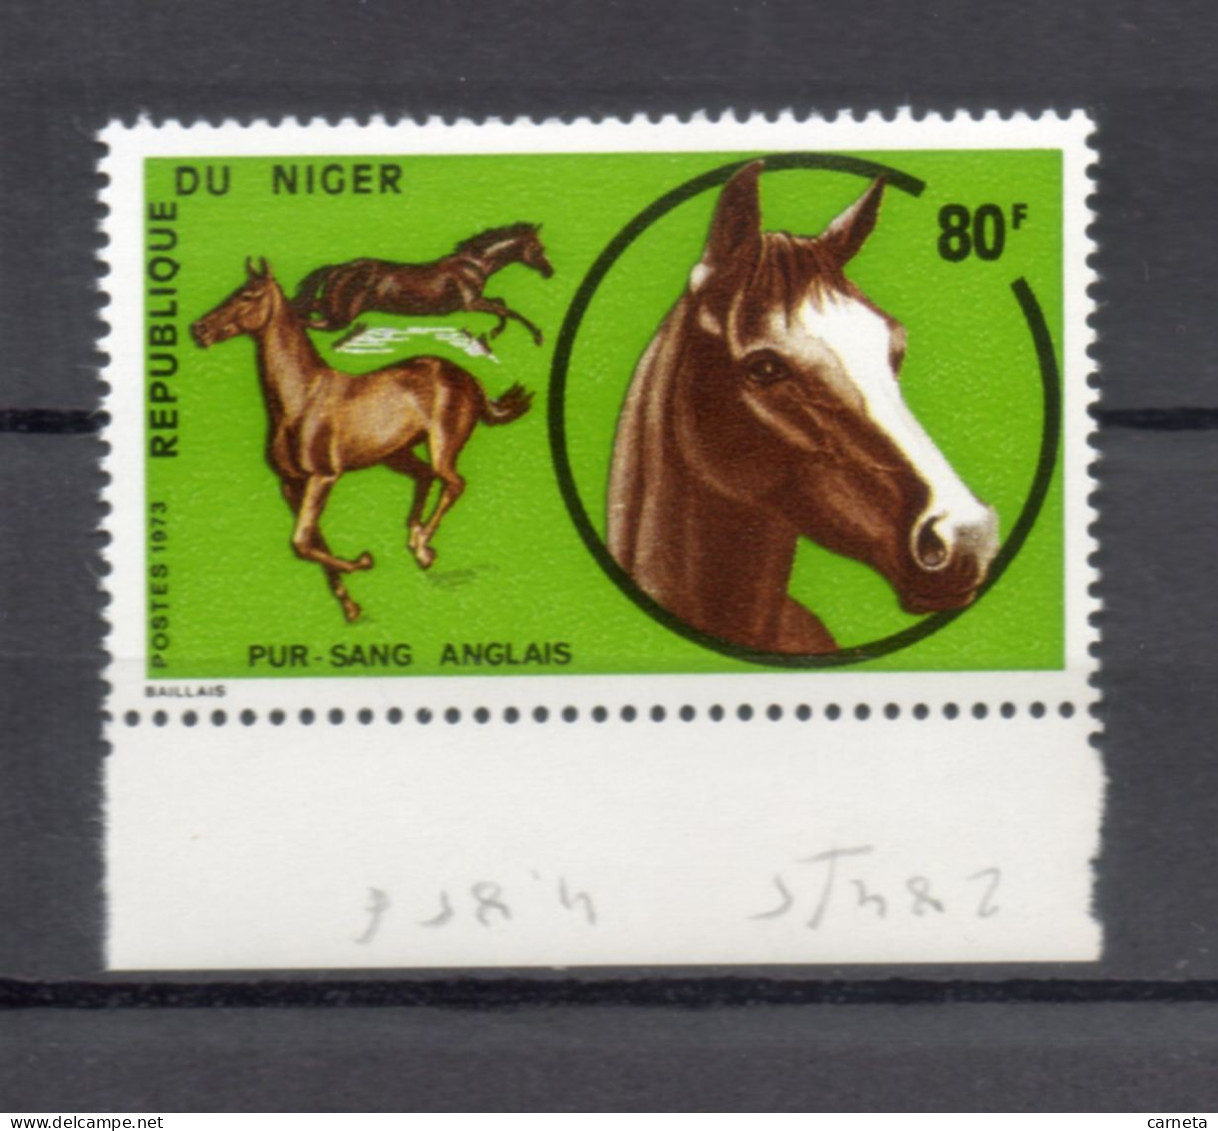 NIGER   N° 284    NEUF SANS CHARNIERE  COTE 2.50€    CHEVAL ANIMAUX FAUNE - Niger (1960-...)